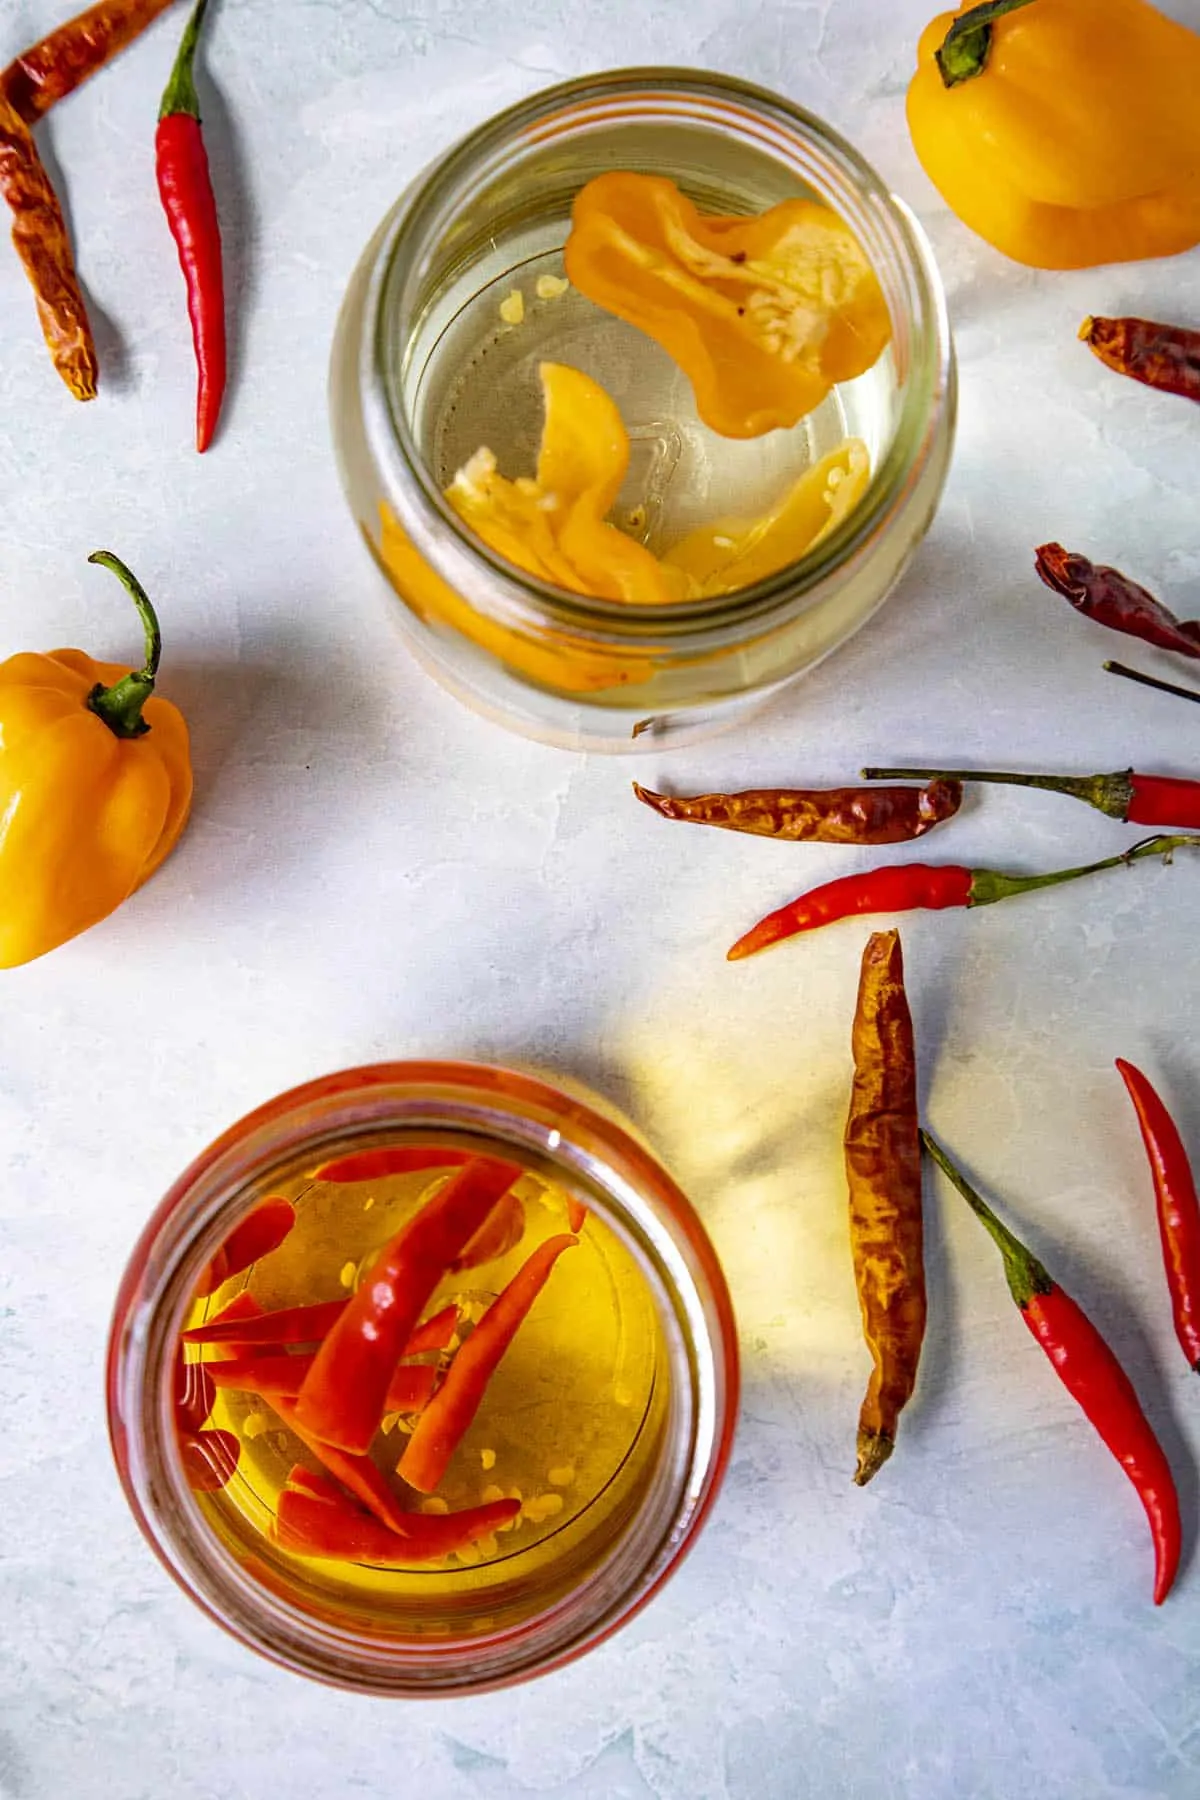 Spicy infused alcohol in jars with extra peppers